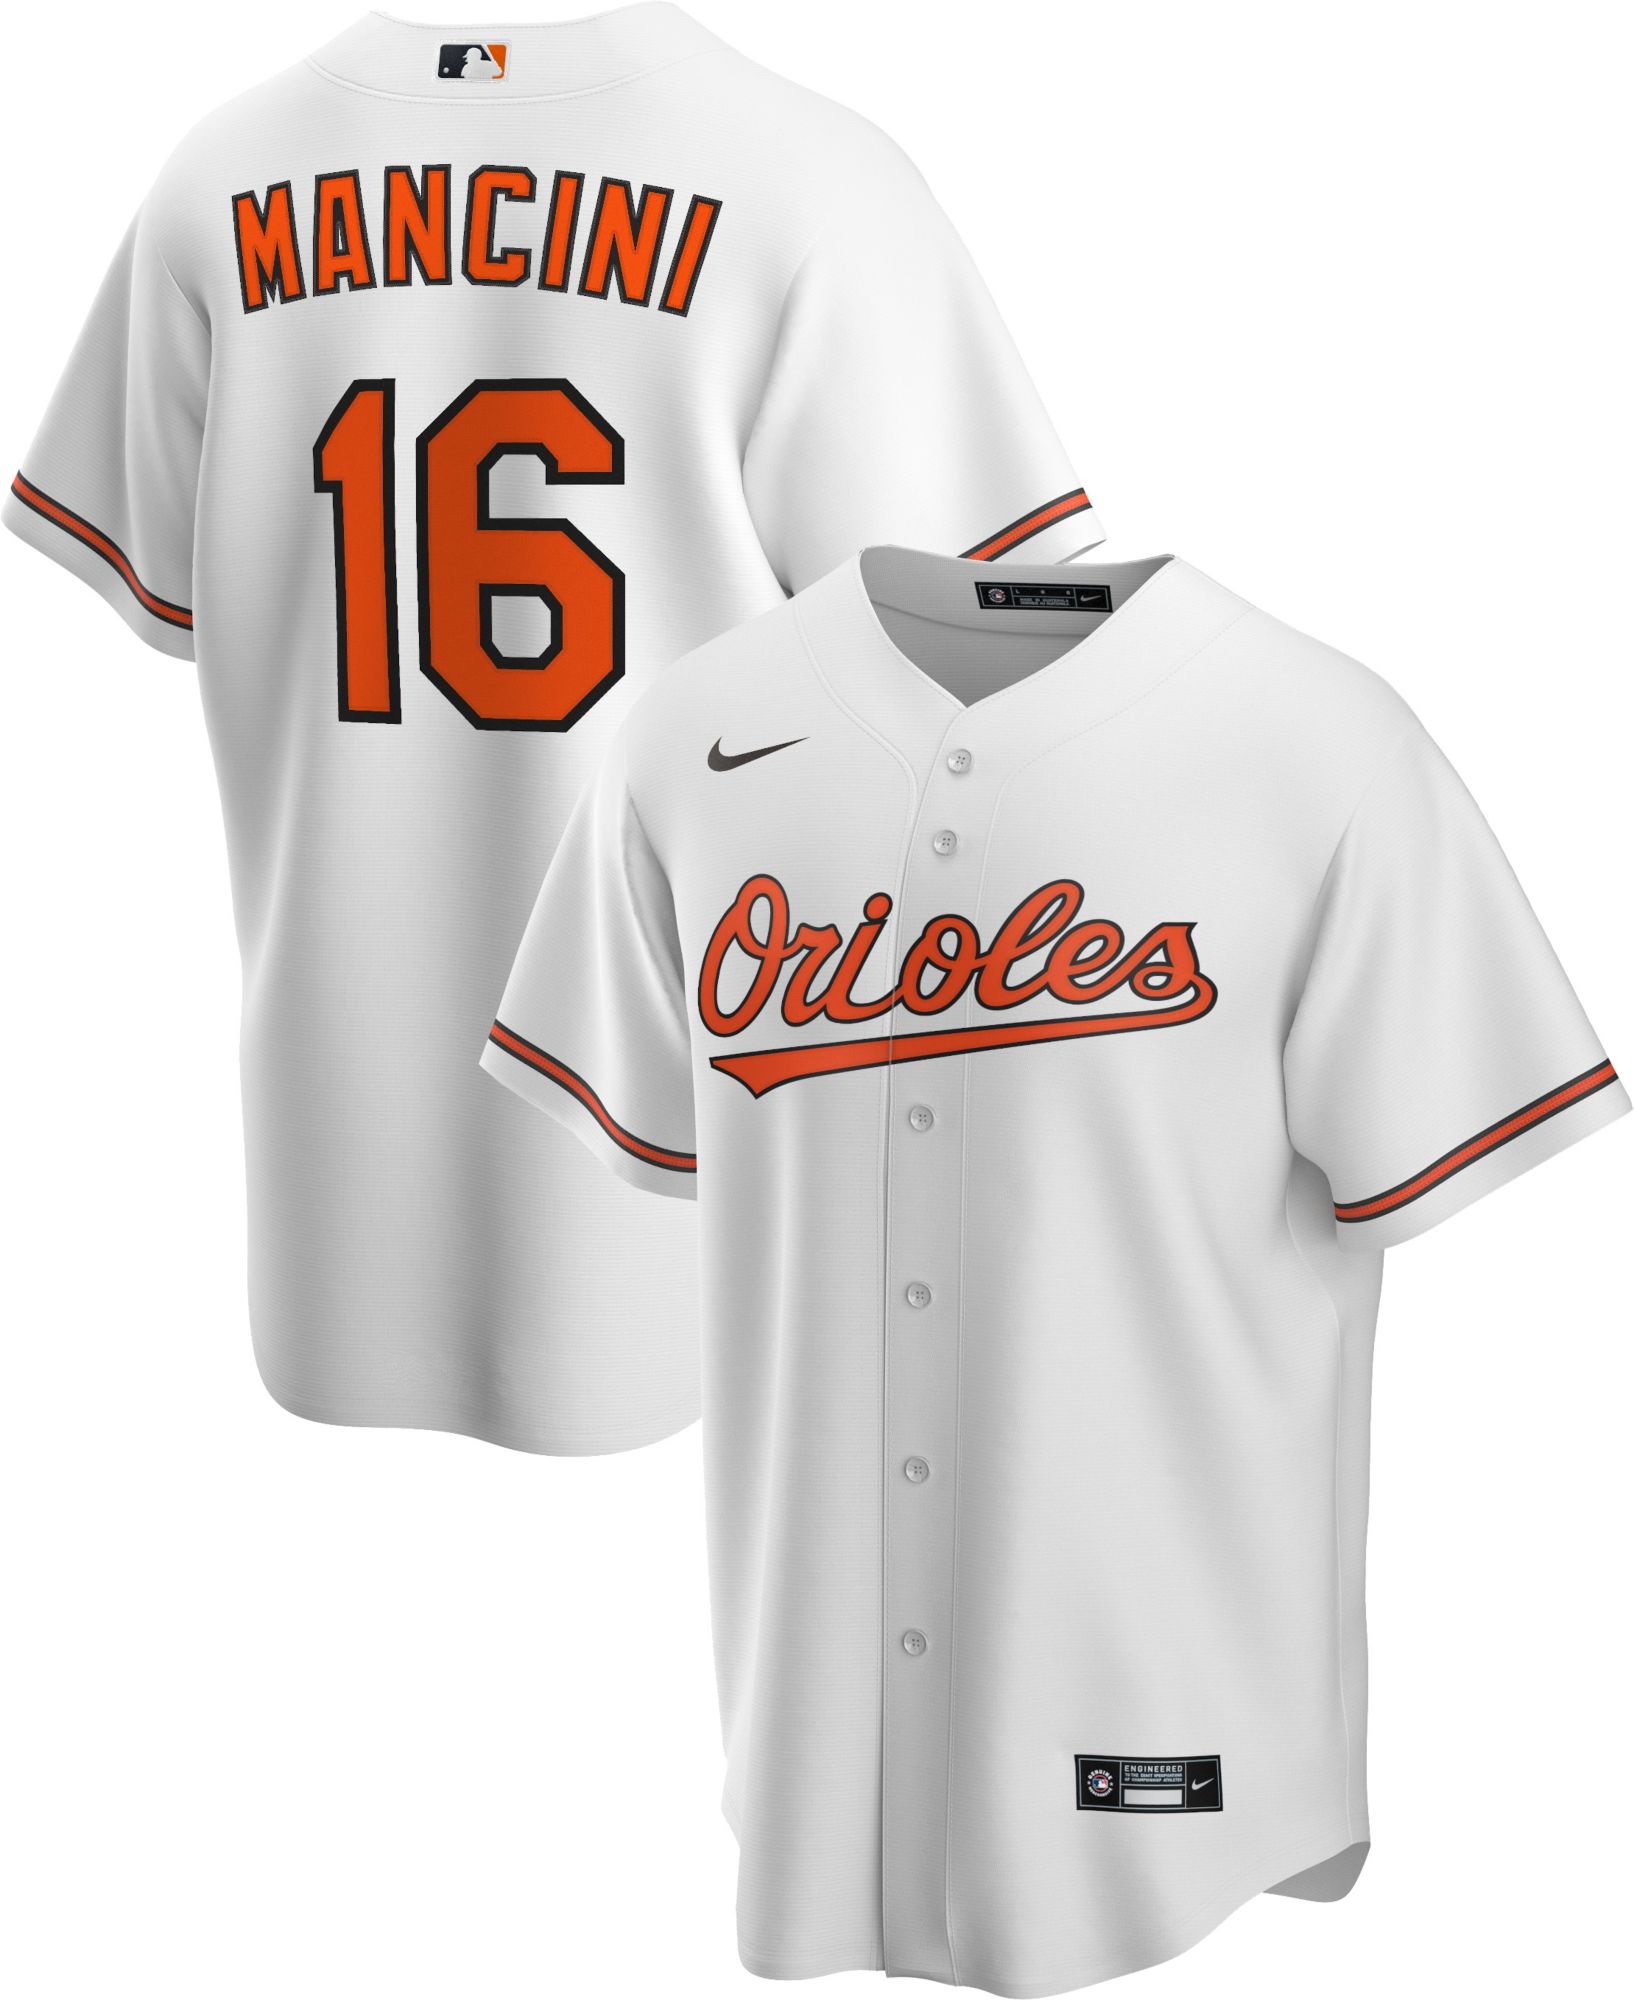 orioles clothing